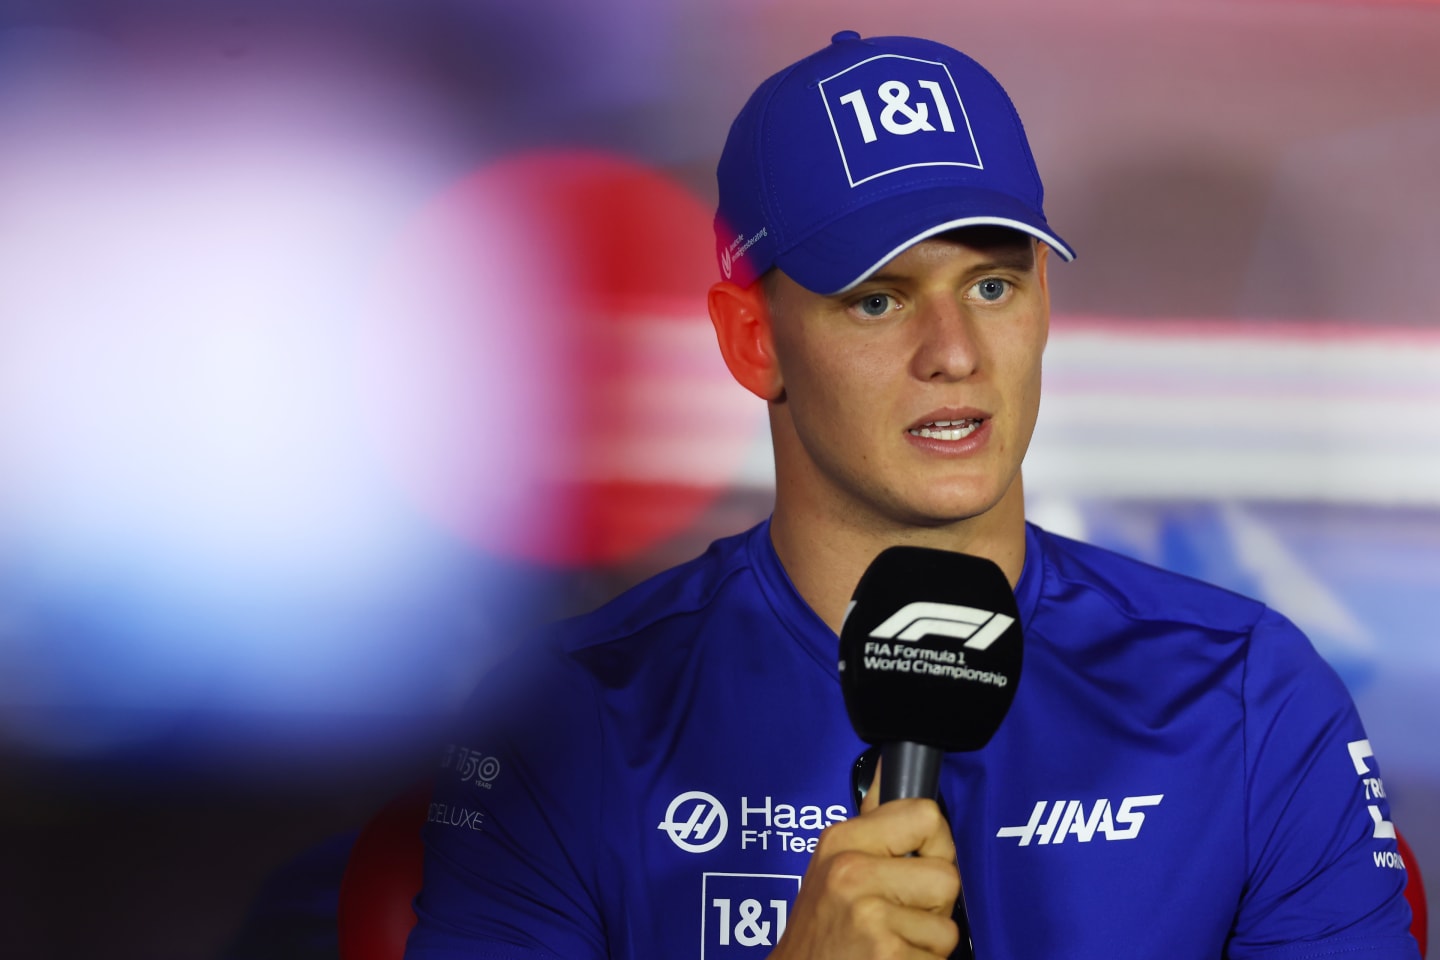 ZANDVOORT, NETHERLANDS - SEPTEMBER 01: Mick Schumacher of Germany and Haas F1 attends the Drivers Press Conference during previews ahead of the F1 Grand Prix of The Netherlands at Circuit Zandvoort on September 01, 2022 in Zandvoort, Netherlands. (Photo by Lars Baron/Getty Images)